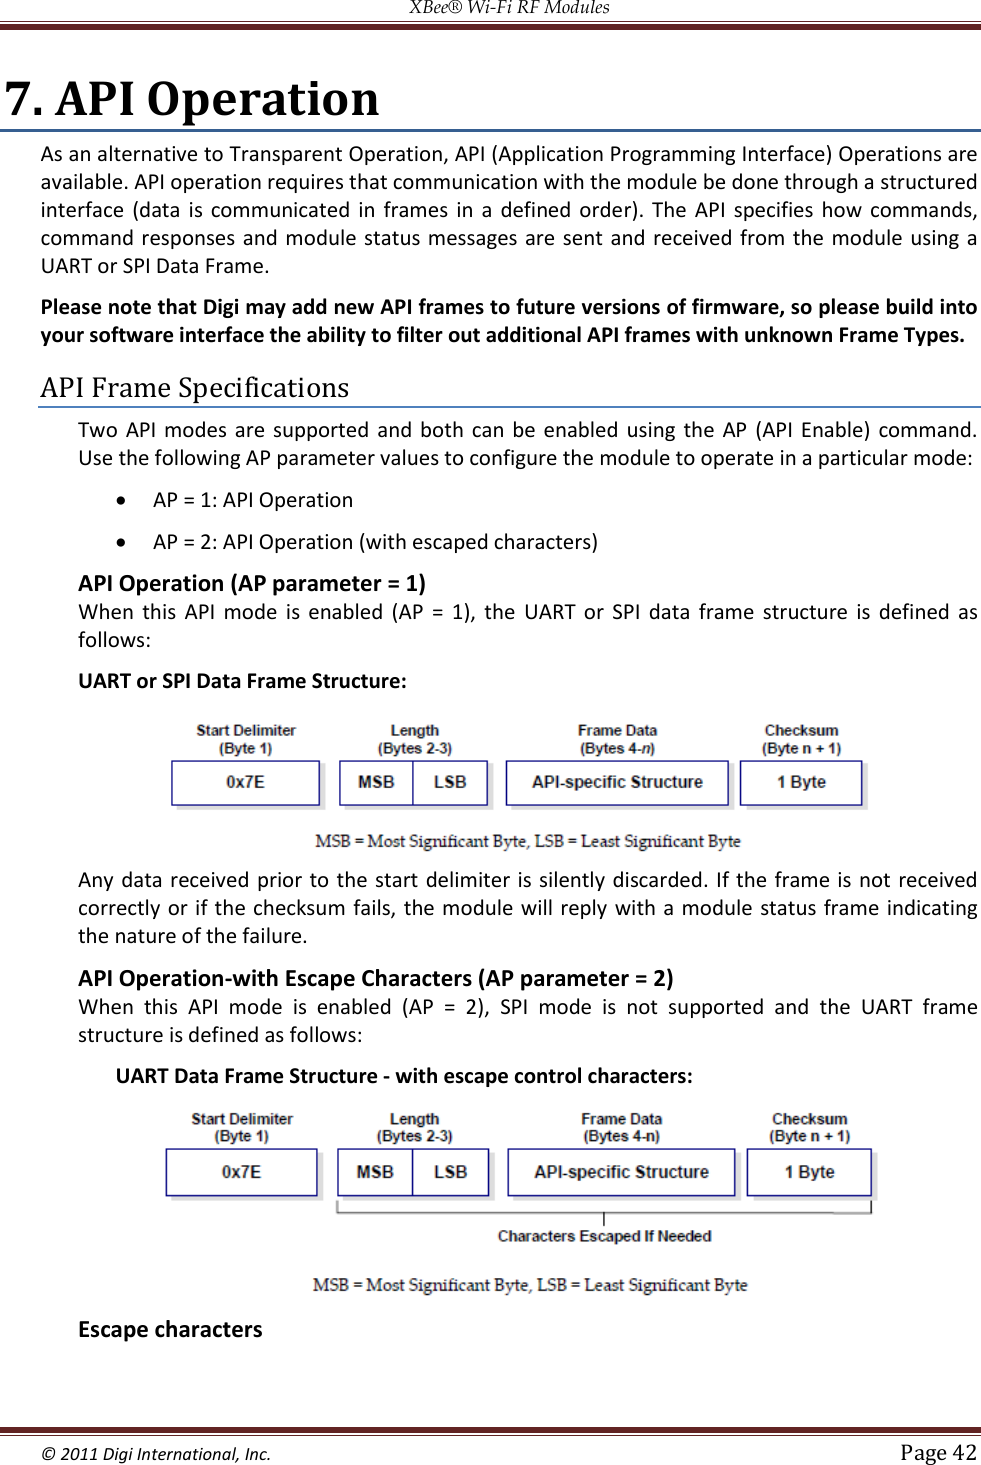 XBee® Wi-Fi RF Modules  © 2011 Digi International, Inc.   Page 42  7. API Operation As an alternative to Transparent Operation, API (Application Programming Interface) Operations are available. API operation requires that communication with the module be done through a structured interface  (data  is  communicated in  frames in  a  defined  order).  The  API  specifies  how commands, command responses and module status messages are sent and received from the  module using a UART or SPI Data Frame. Please note that Digi may add new API frames to future versions of firmware, so please build into your software interface the ability to filter out additional API frames with unknown Frame Types. API Frame Specifications Two  API  modes  are supported and  both  can  be enabled using  the  AP (API Enable)  command. Use the following AP parameter values to configure the module to operate in a particular mode:  AP = 1: API Operation   AP = 2: API Operation (with escaped characters) API Operation (AP parameter = 1) When  this  API  mode  is  enabled  (AP  =  1),  the  UART  or  SPI  data  frame  structure  is  defined  as follows: UART or SPI Data Frame Structure:                               Any data received prior to the start delimiter  is silently discarded. If the frame is  not received correctly or if the checksum fails, the module will reply with a module status  frame indicating the nature of the failure. API Operation-with Escape Characters (AP parameter = 2) When  this  API  mode  is  enabled  (AP  =  2),  SPI  mode  is  not  supported  and  the  UART  frame structure is defined as follows: UART Data Frame Structure ‐ with escape control characters:                           Escape characters 